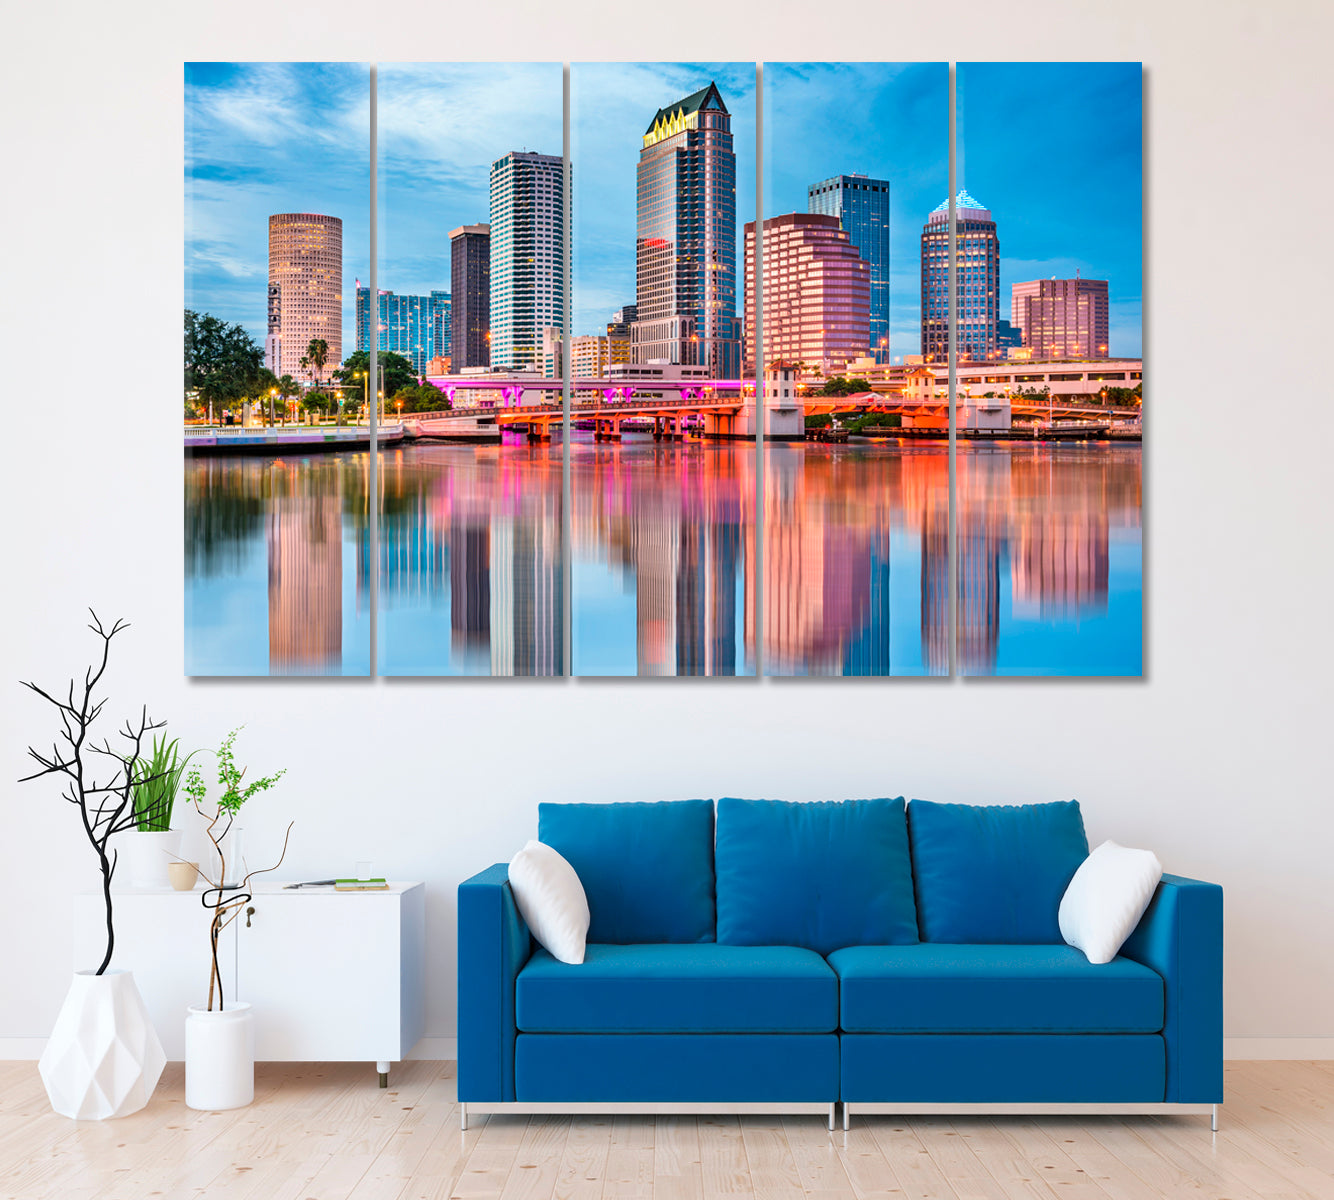 Tampa Downtown Skyline Canvas Print ArtLexy 5 Panels 36"x24" inches 